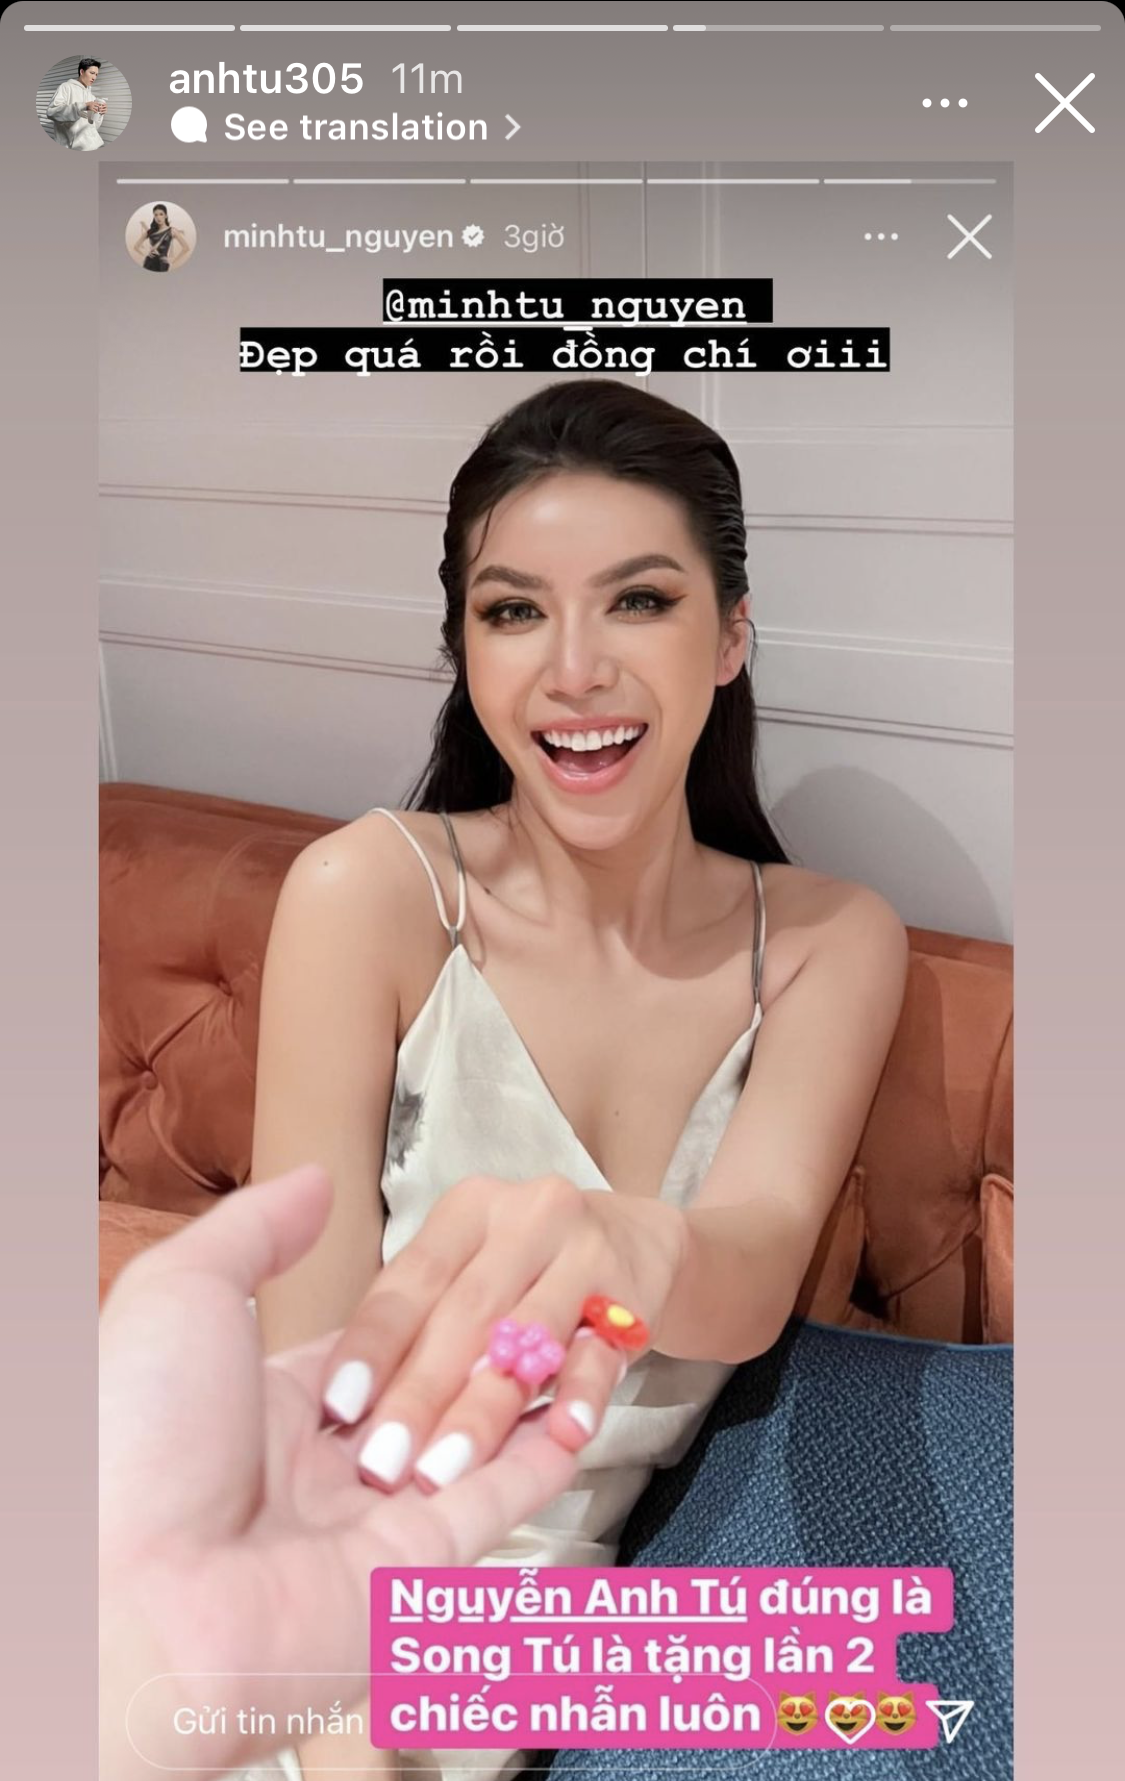 Thanks to the cast of Stars, netizens gradually guessed the truth after a series of photos of Anh Tu proposing to LyLy - Photo 4.